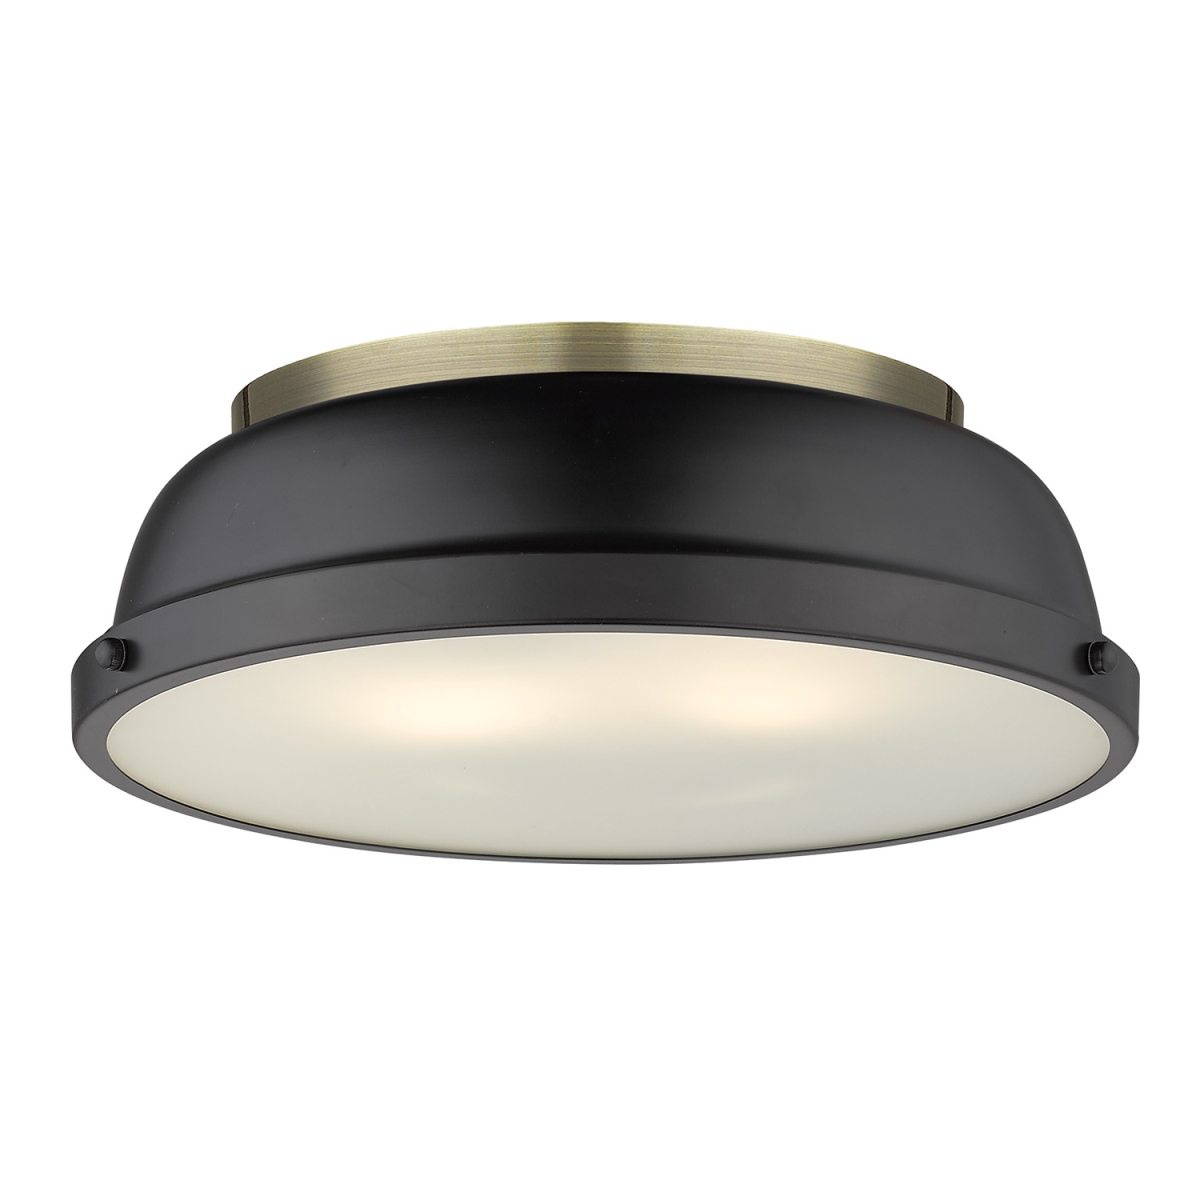 3602-14 Ab-blk Duncan 14 In. Flush Mount Light With Matte Black Shade, Aged Brass